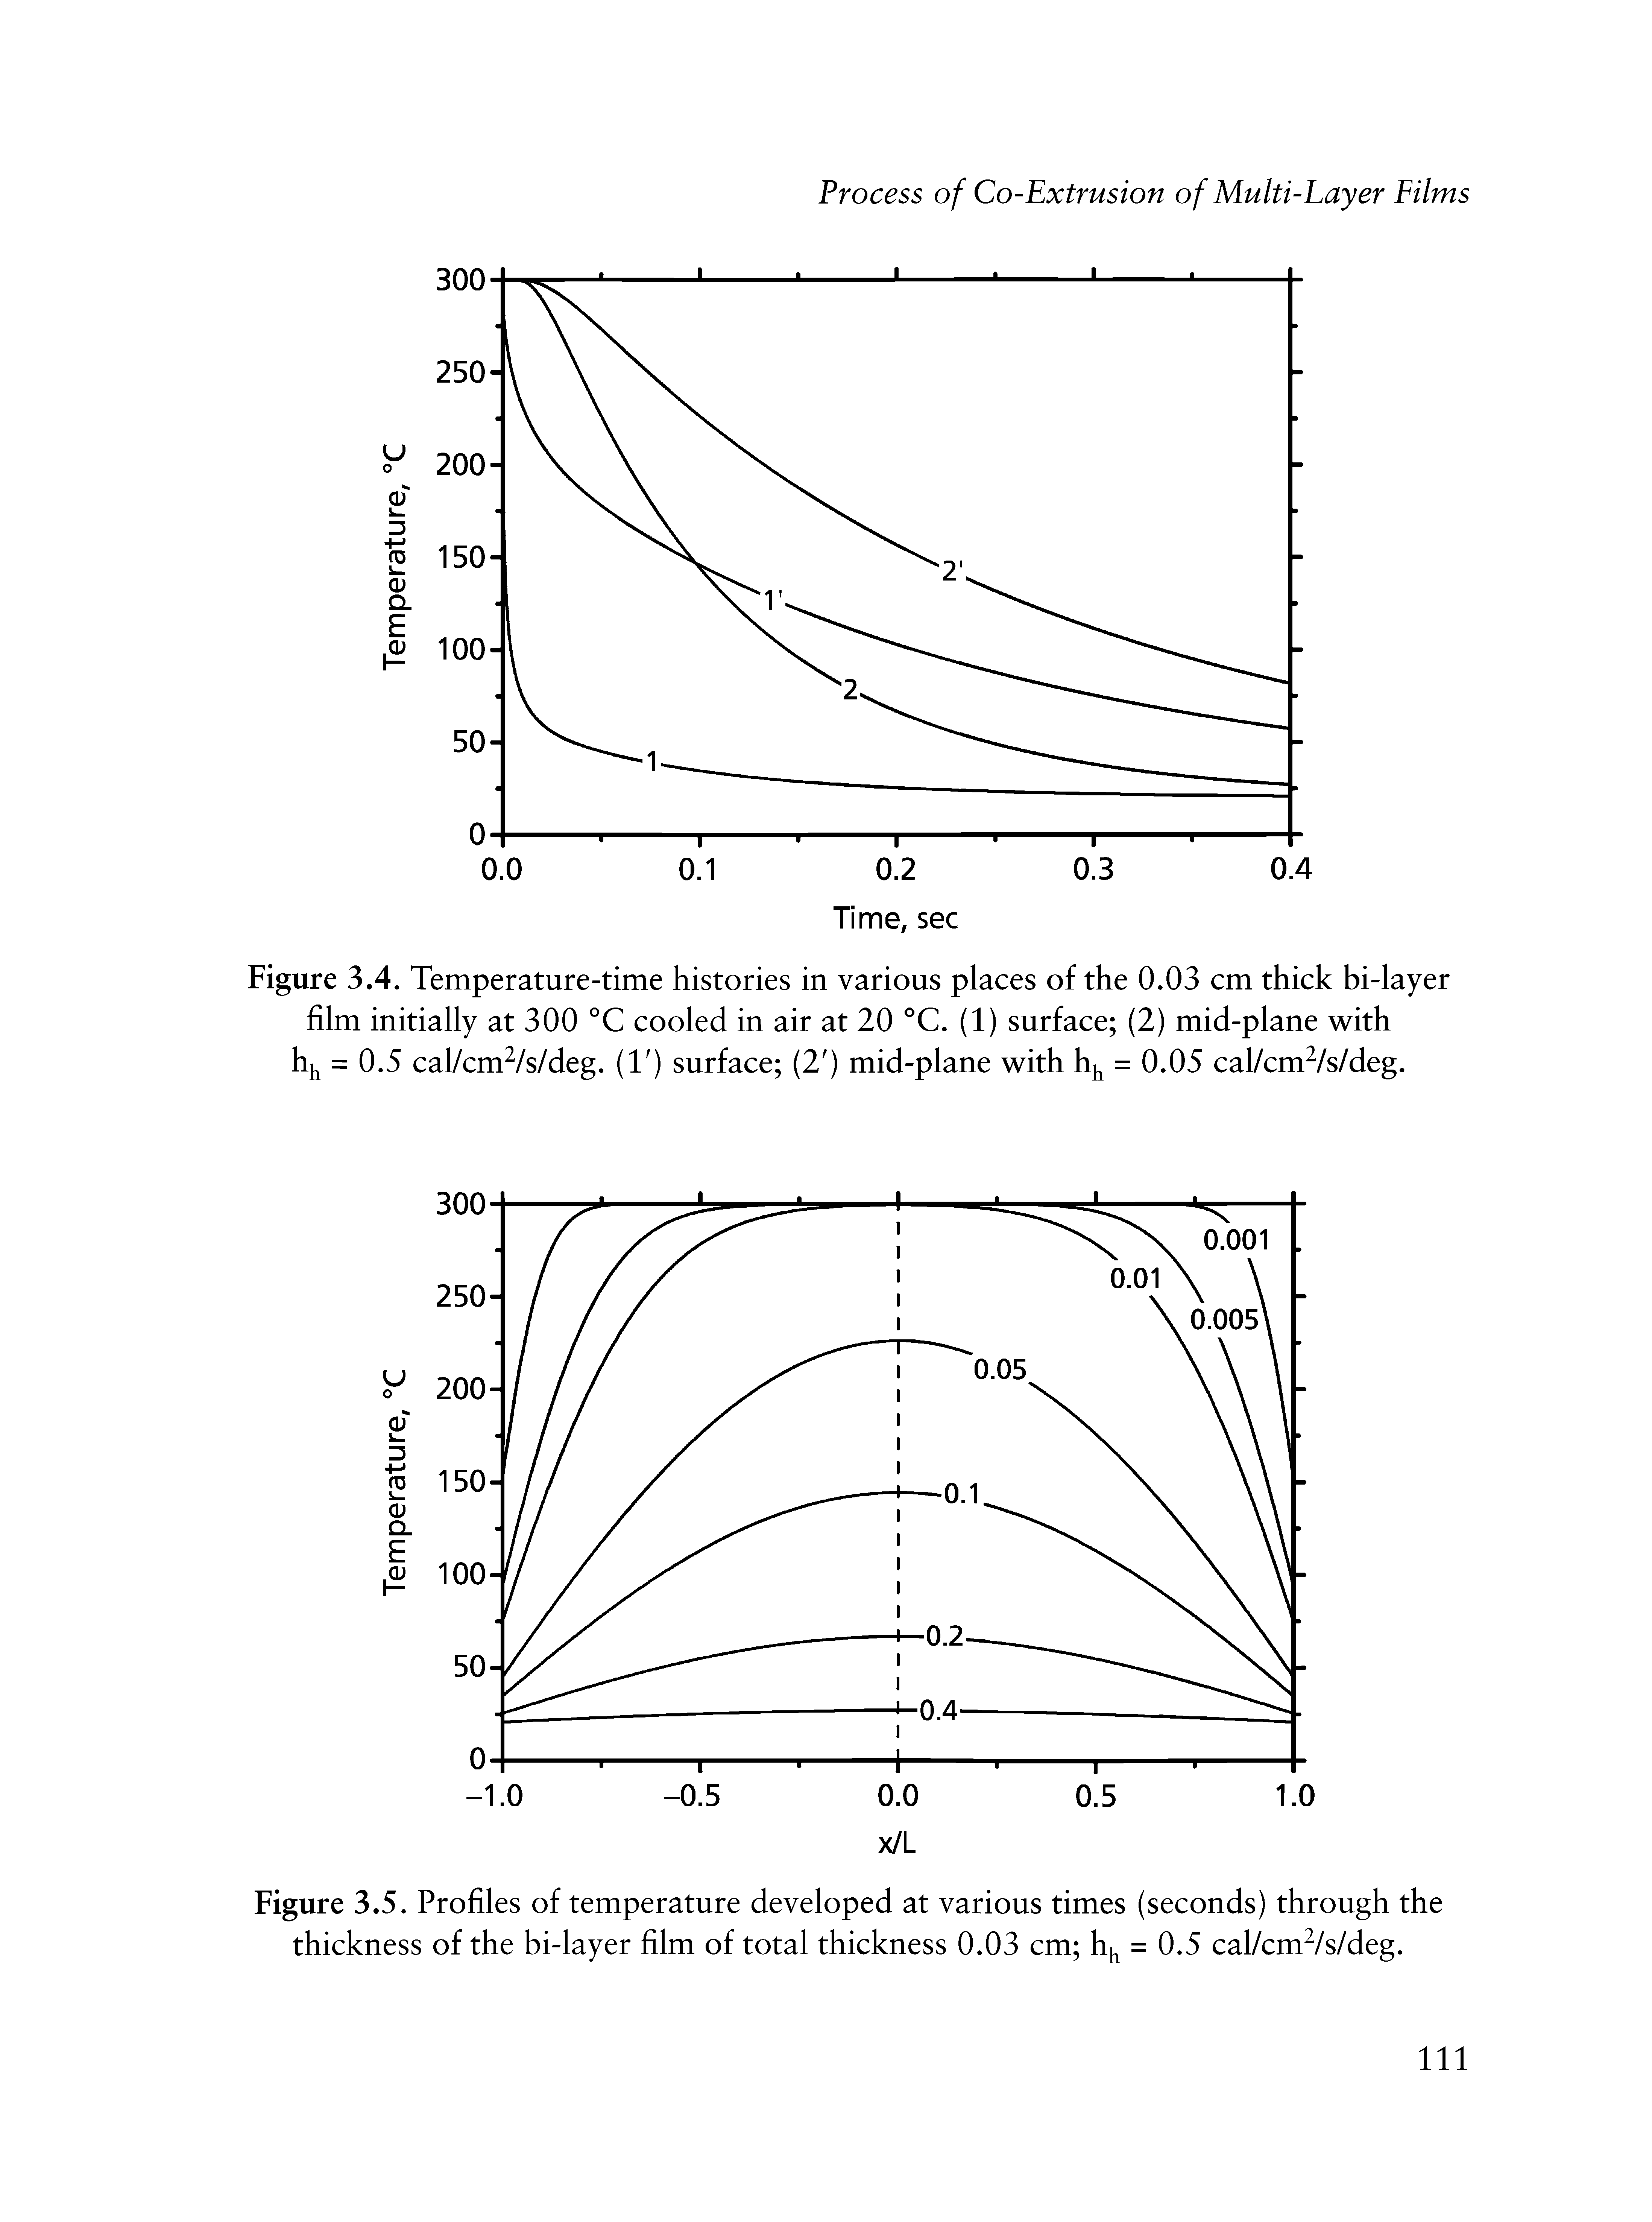 Figure 3.4. Temperature-time histories in various places of the 0.03 cm thick bi-layer film initially at 300 °C cooled in air at 20 C. (1) surface (2) mid-plane with = 0.5 cal/cm /s/deg. ( ) surface (2 ) mid-plane with hj = 0.05 cal/cm /s/deg.